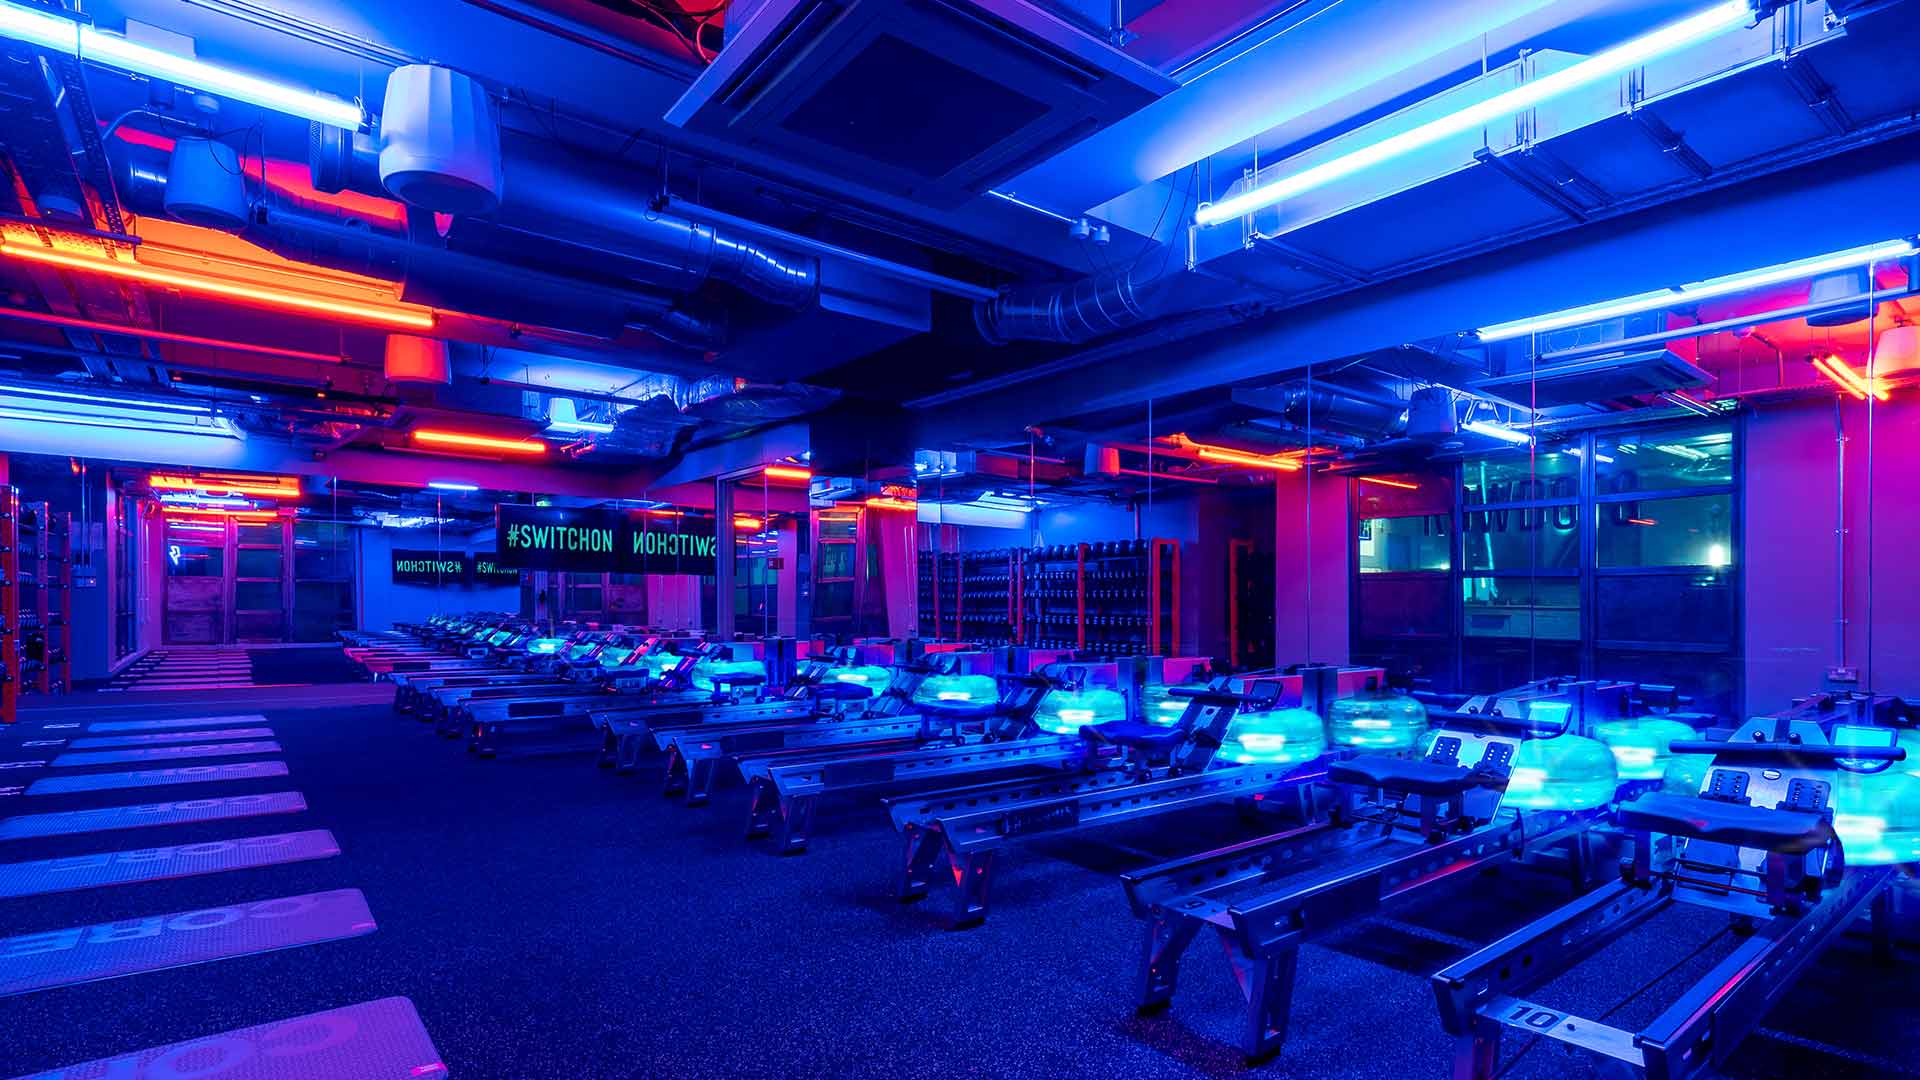 Lighting Design Rowbots Boutique Rowing Gym Dramatic Bold Blue Amber Light Workout Studio Consultant London Nulty